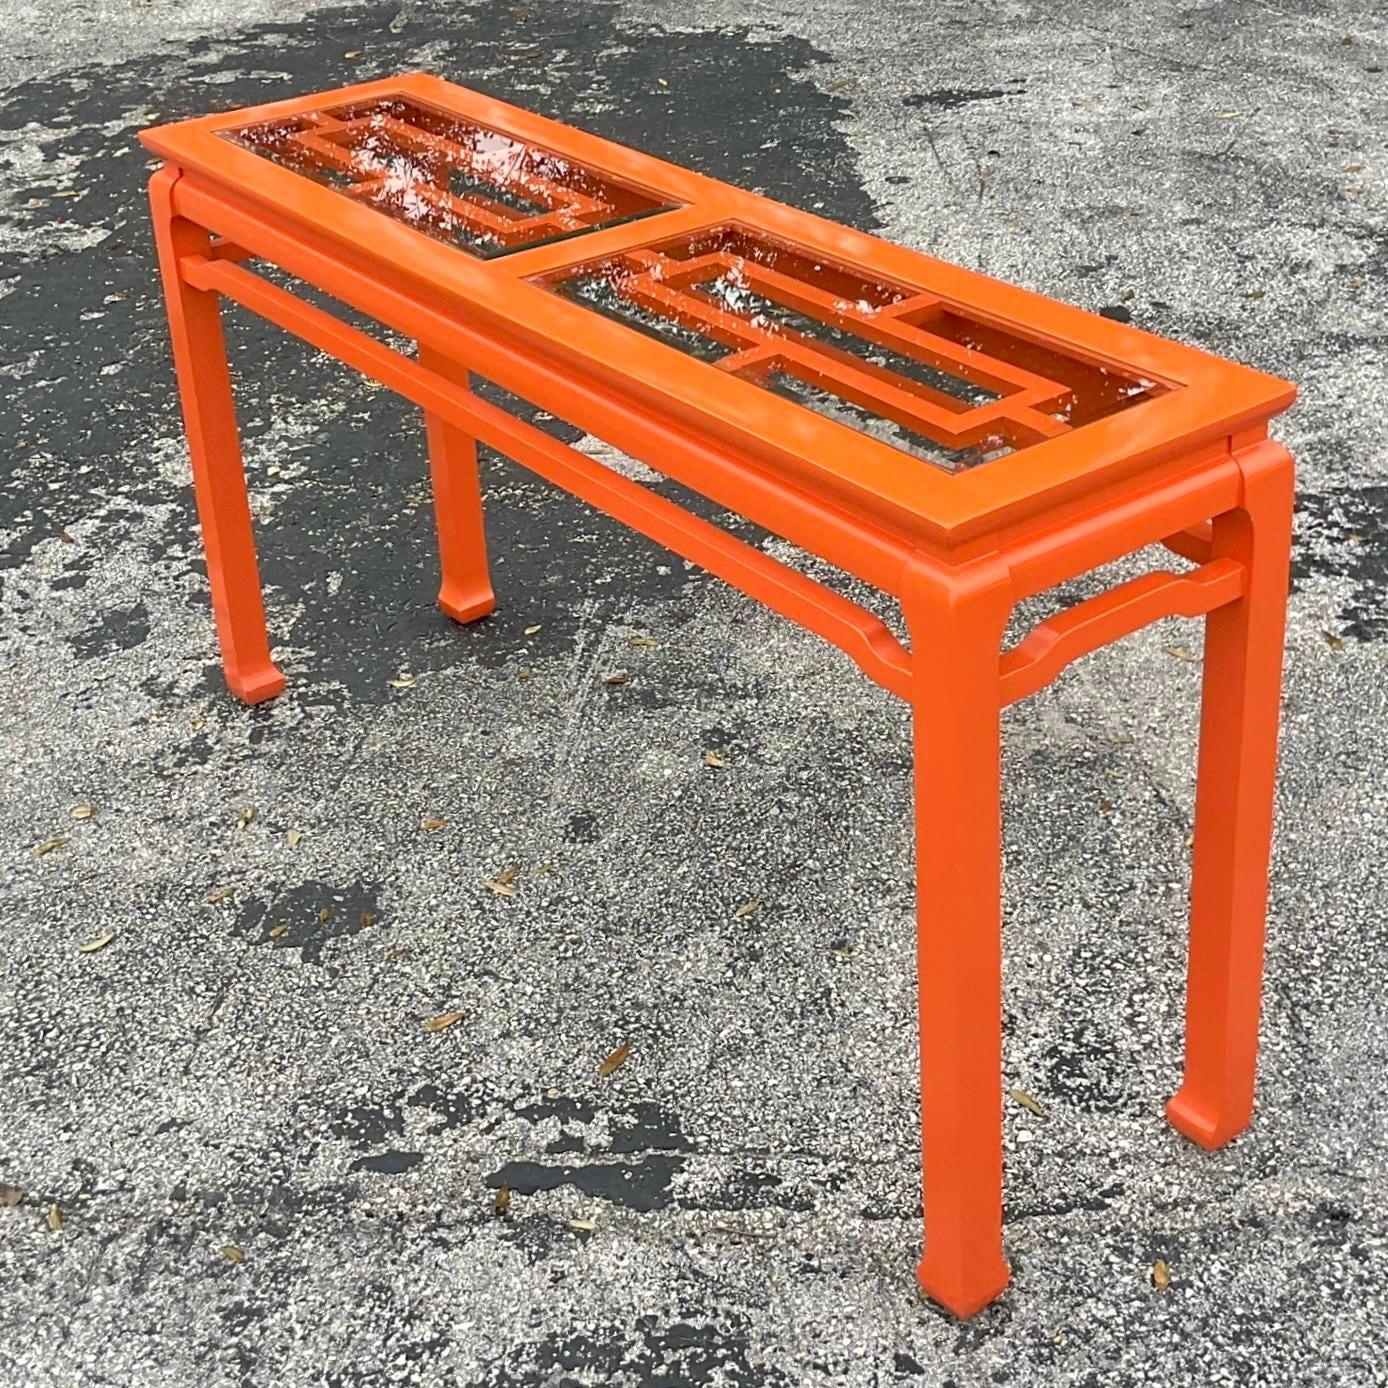 Late 20th Century Vintage Regency Orange Lacquered Fretwork Console Table For Sale 2